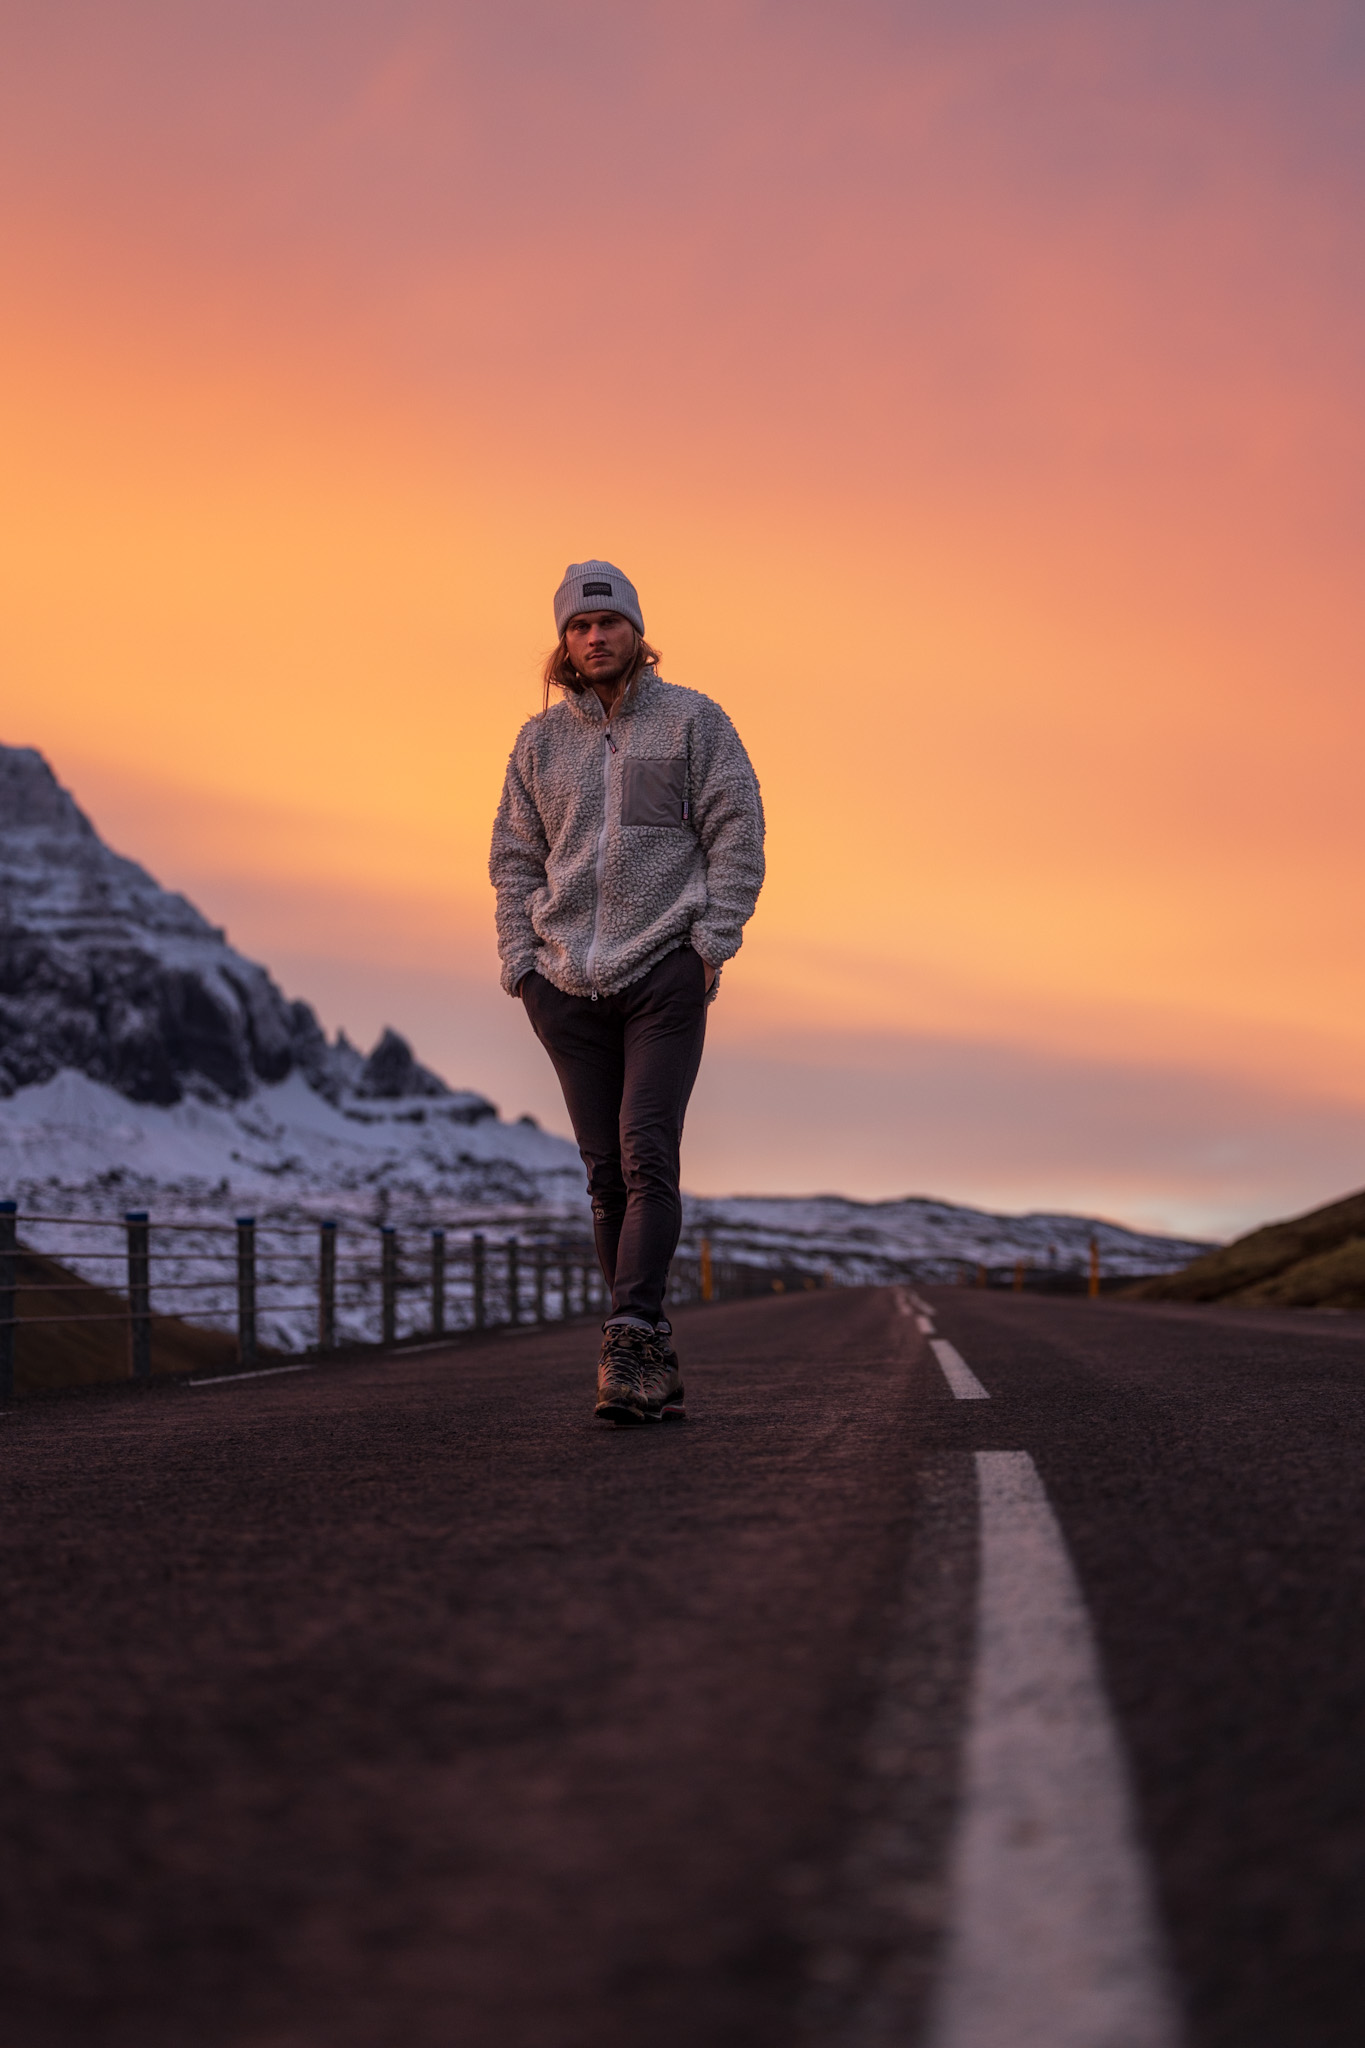 Rúrik Gíslason stands on a road with an orange-sky sunset behind him, and a backdrop of snowy peaks